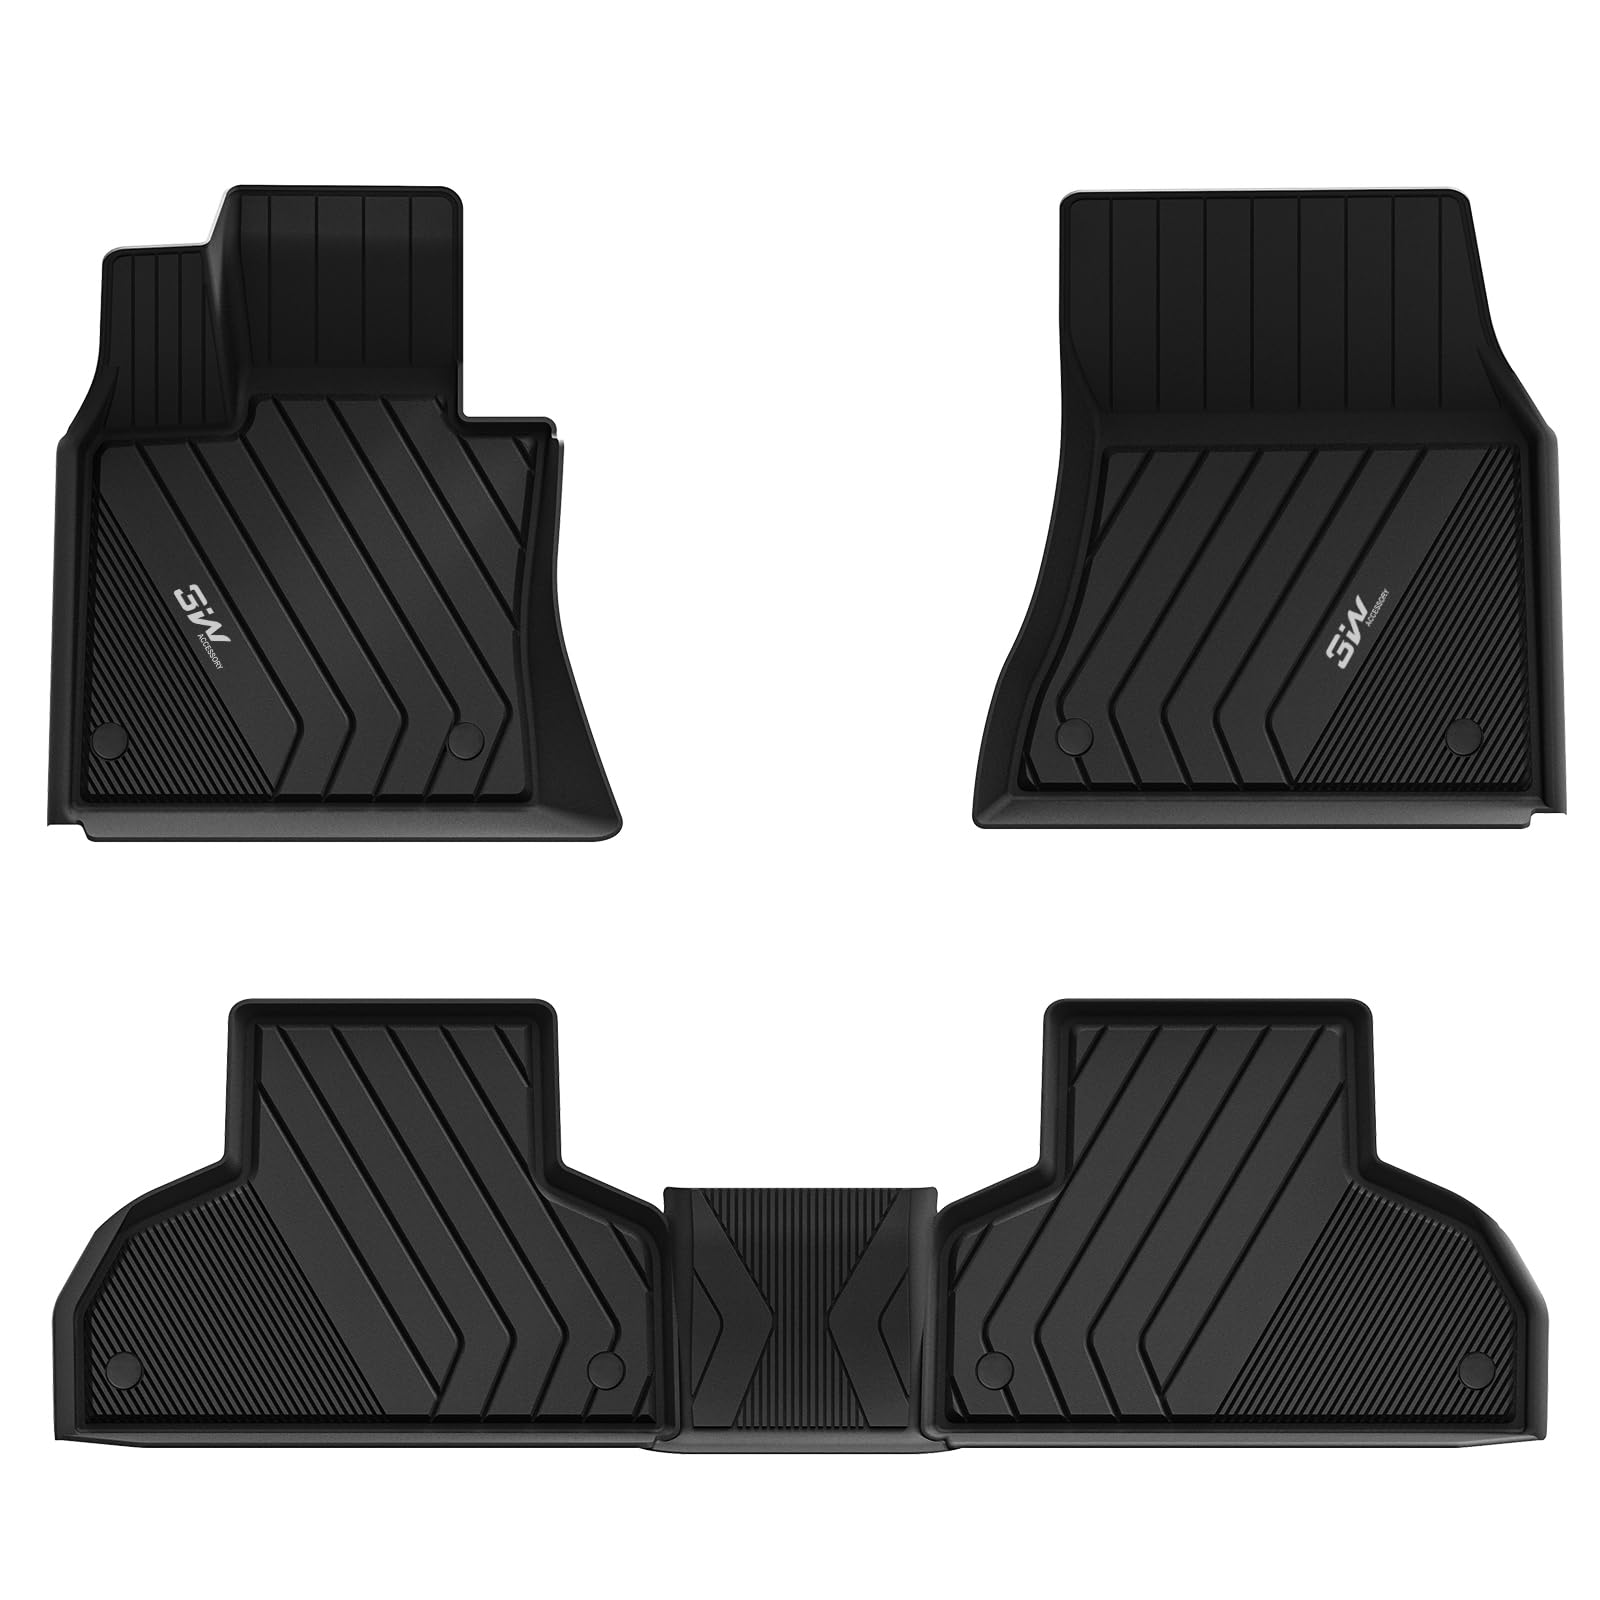 3W BMW X5 2014-2018 Custom Floor Mats / Trunk Mat TPE Material & All-Weather Protection Vehicles & Parts 3Wliners 2014-2018 X5 2014-2018 1st&2nd Row Mats